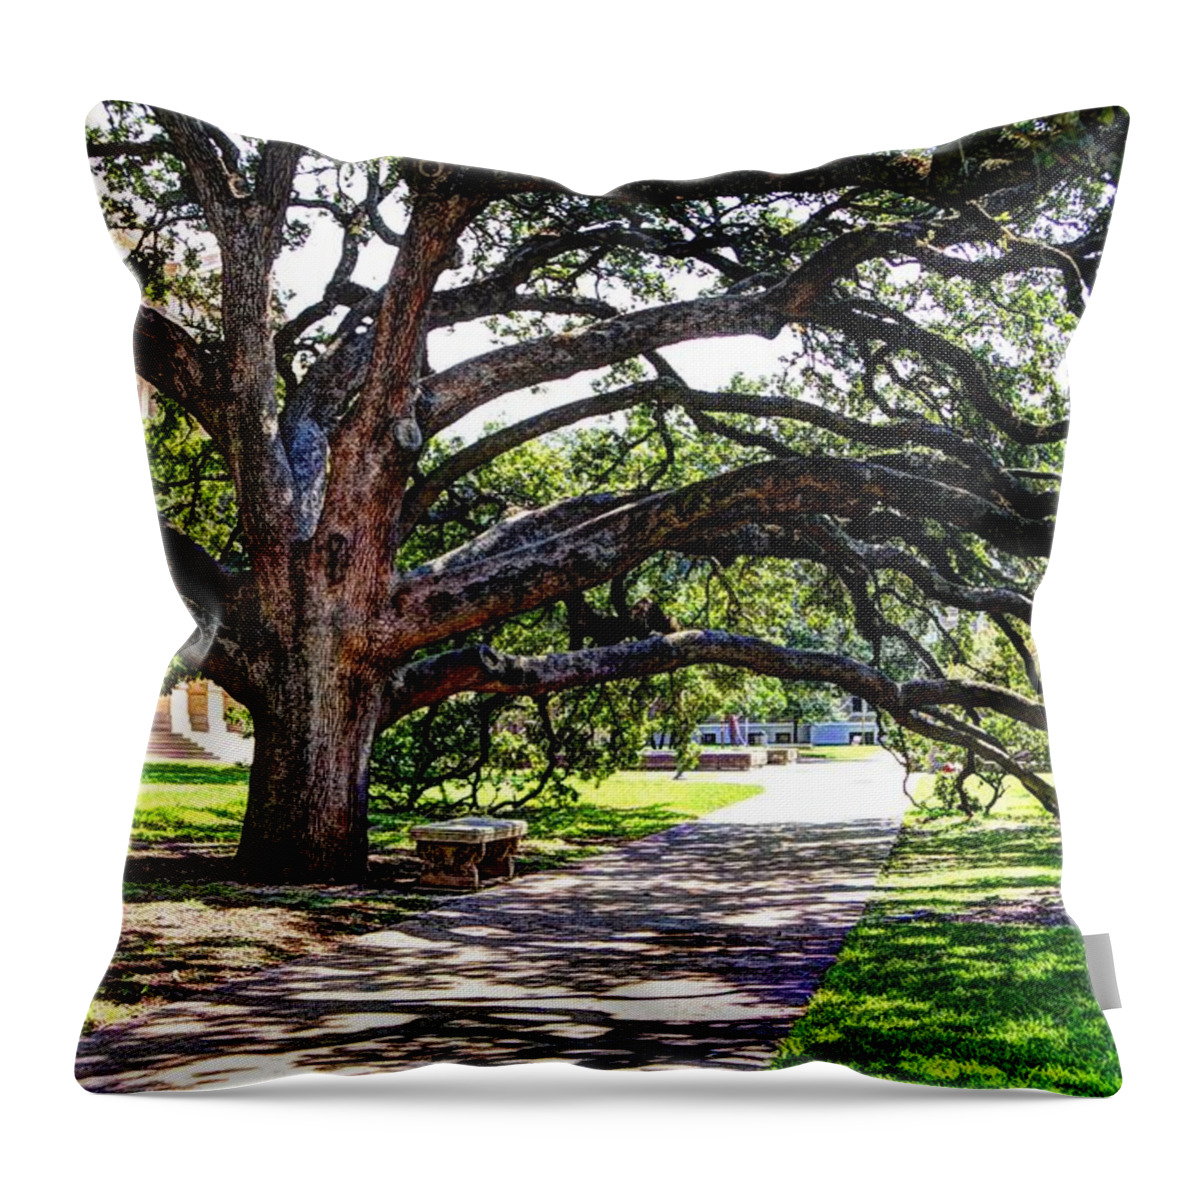 Texas A&m Throw Pillow featuring the photograph Century Tree by Rick Cassani